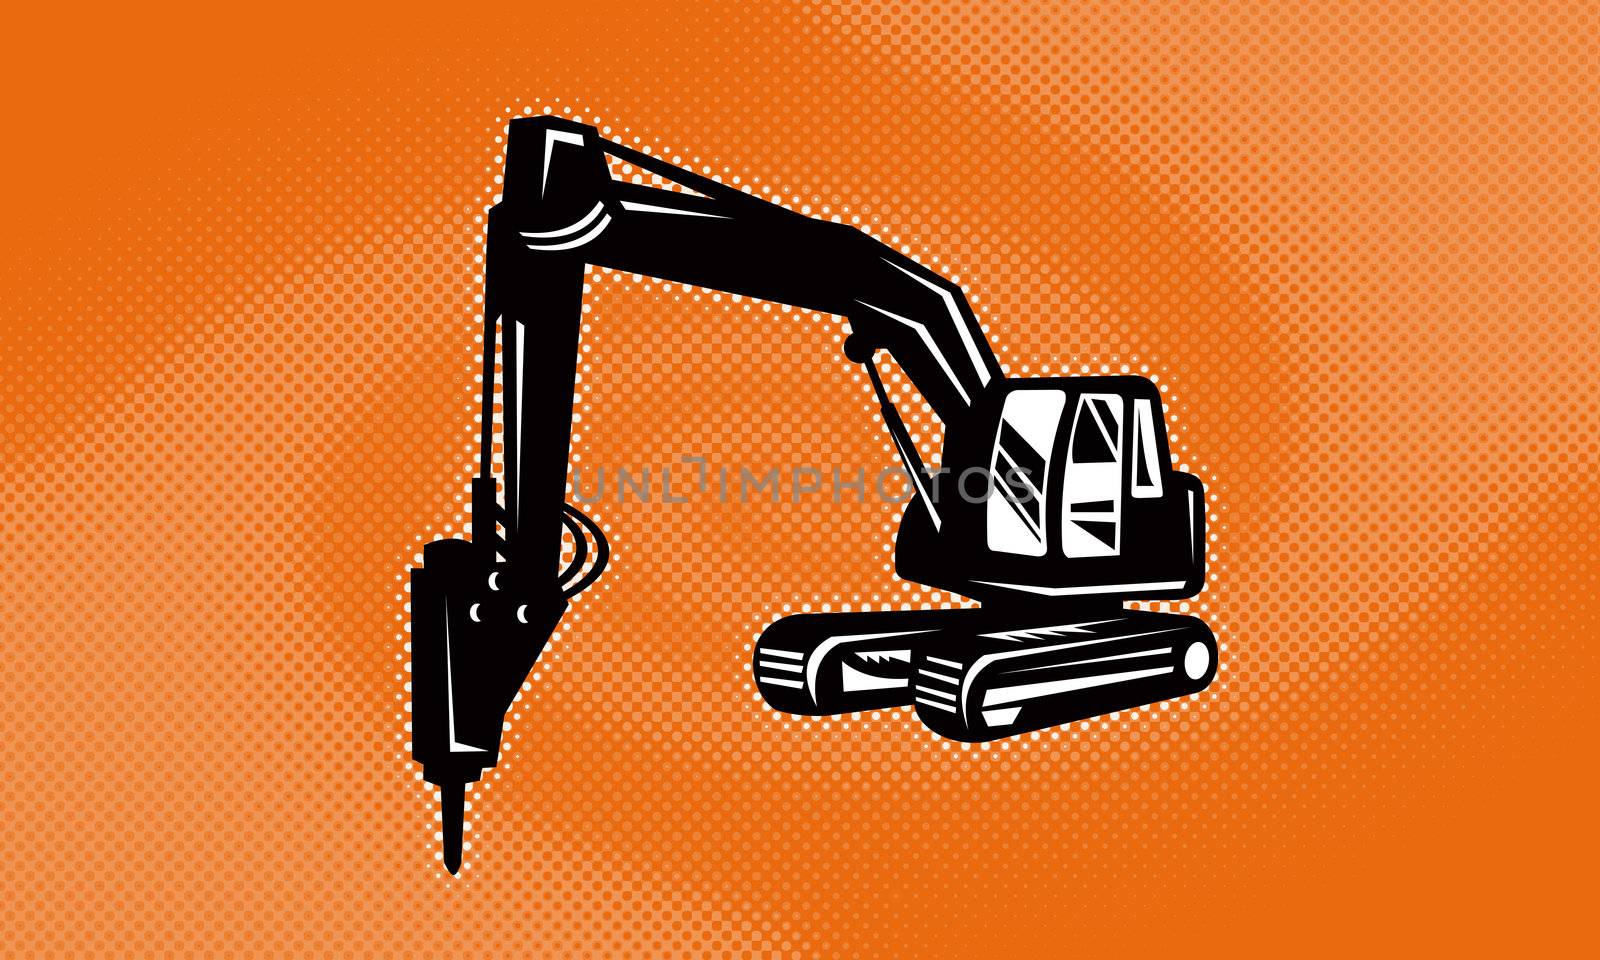 illustration of a construction digger mechanical excavator done in retro style with halftone dot twirl or swirl in background